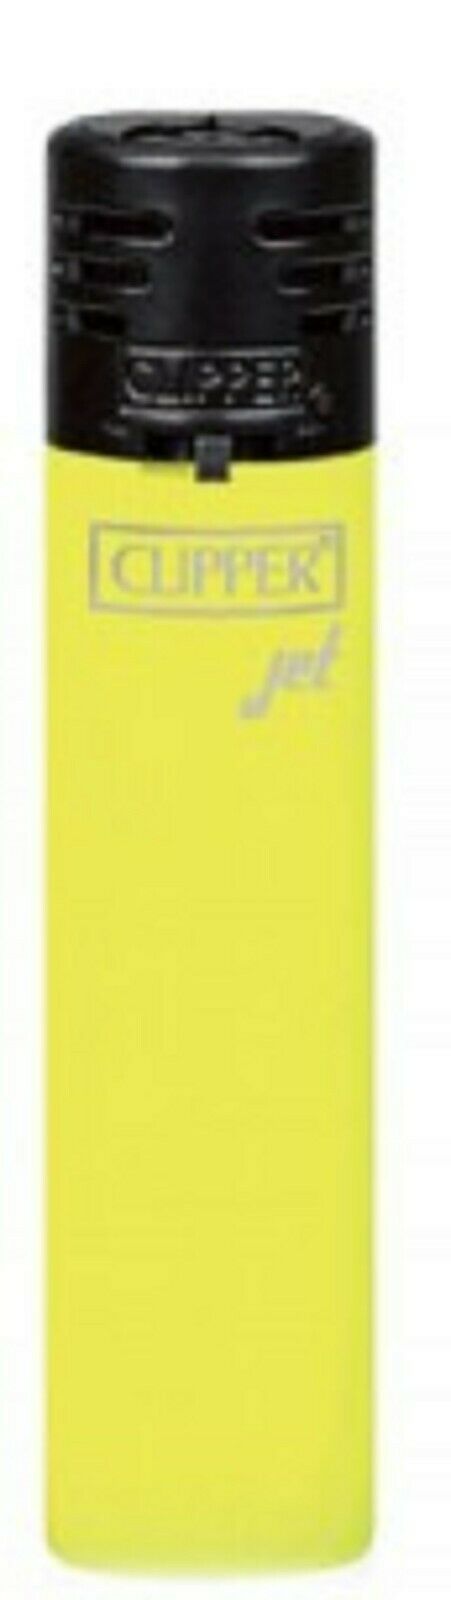 clipper lighter New Jet flame Yellow genuine product